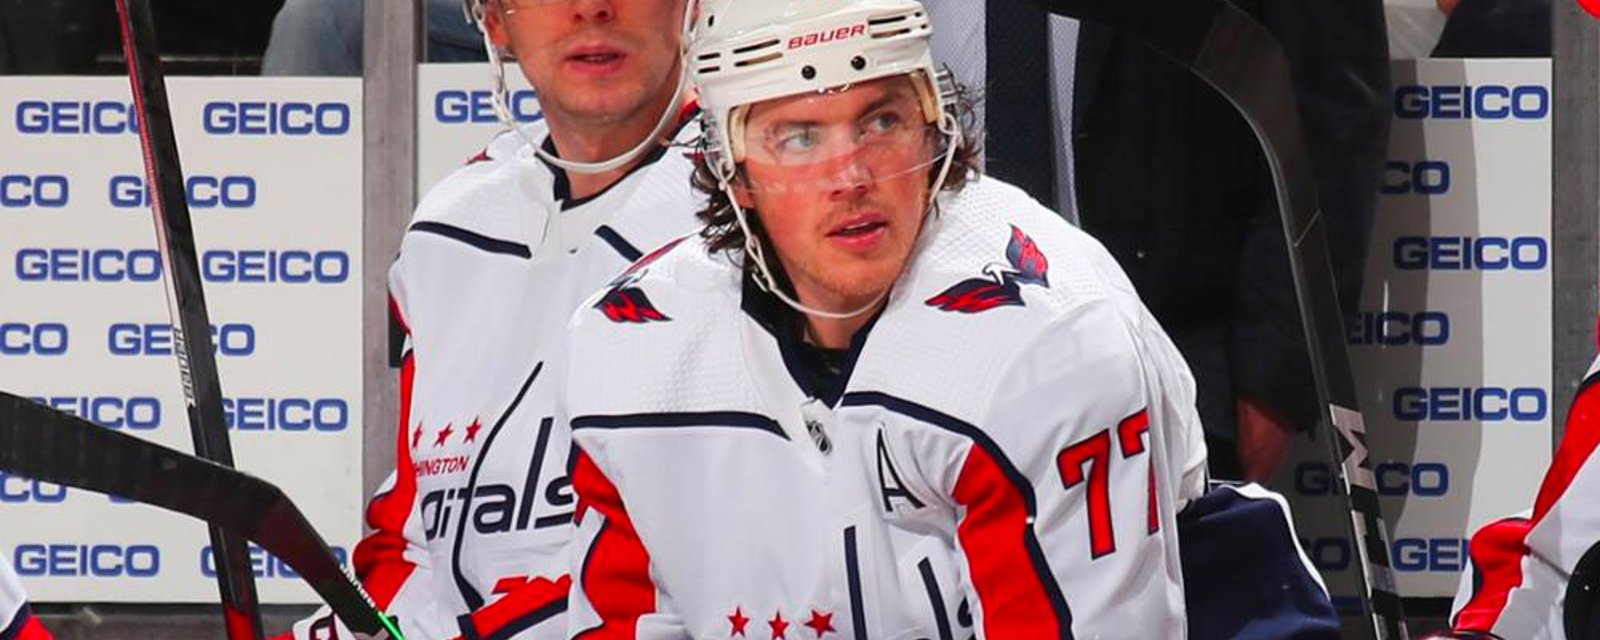 Capitals confirm the worst for 35 year old veteran T.J. Oshie